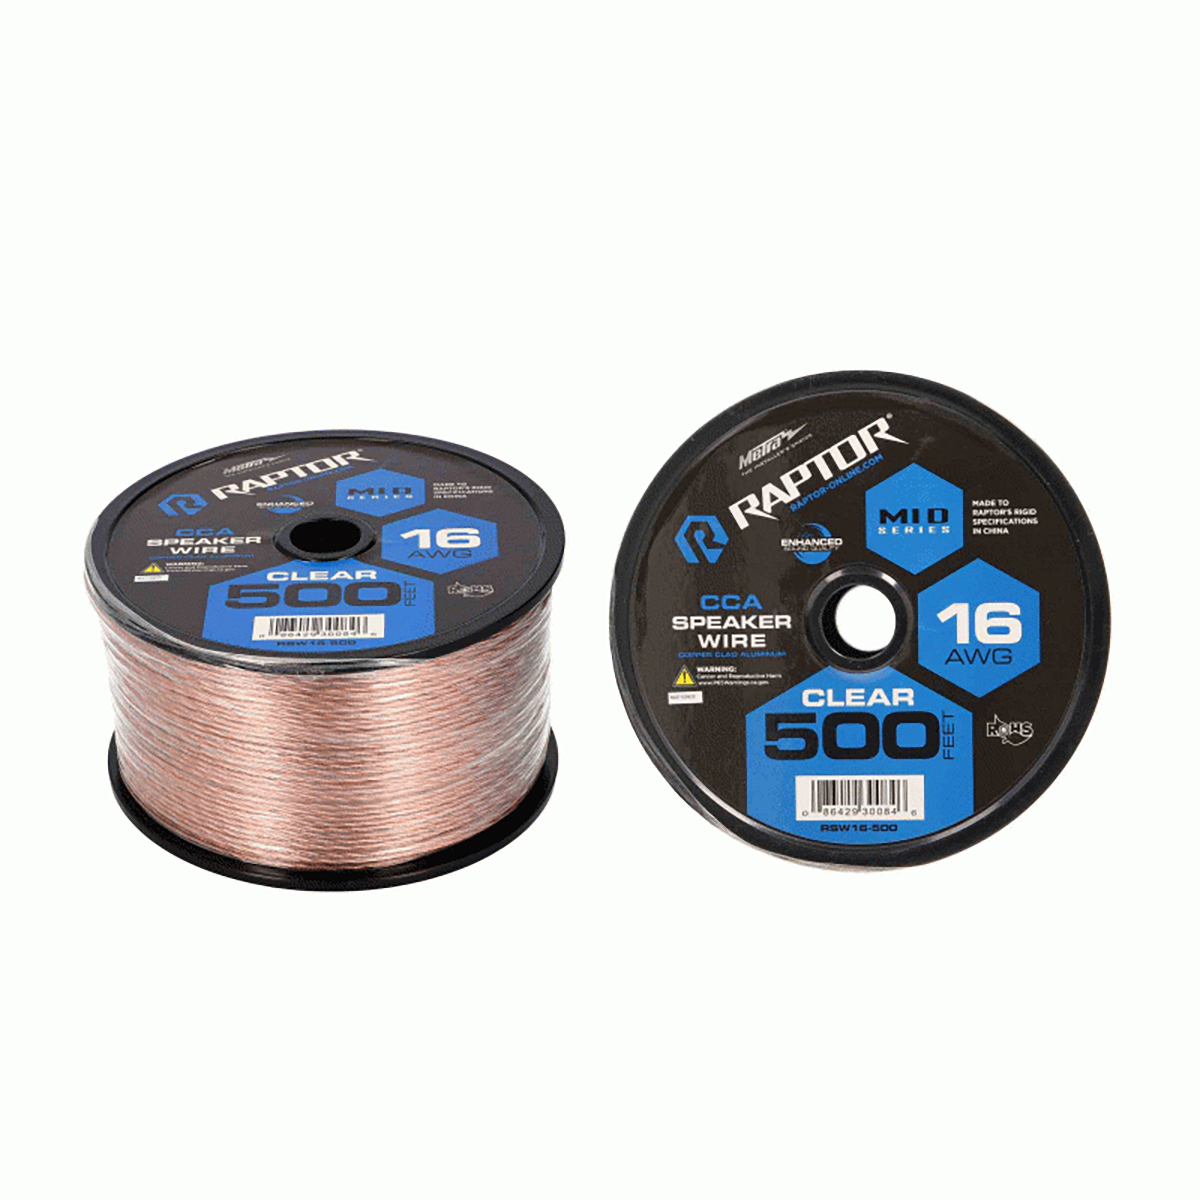 SPEAKER WIRE 16GA CLEAR 500FT  VICE SERIES